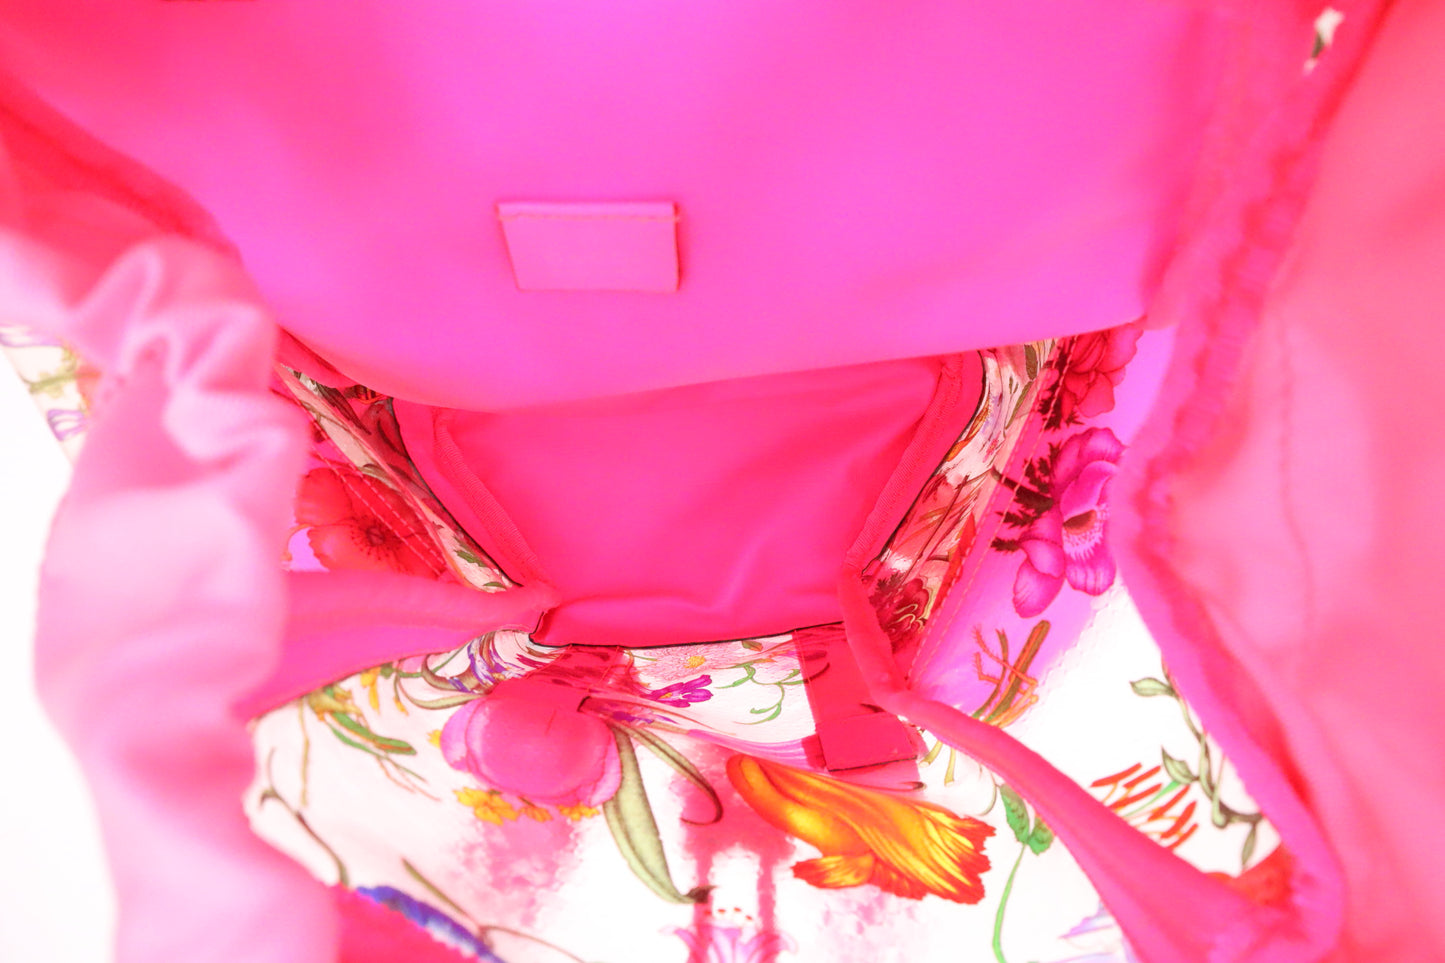 Gucci Backpack in Floral PVC and Neon Pink Leather